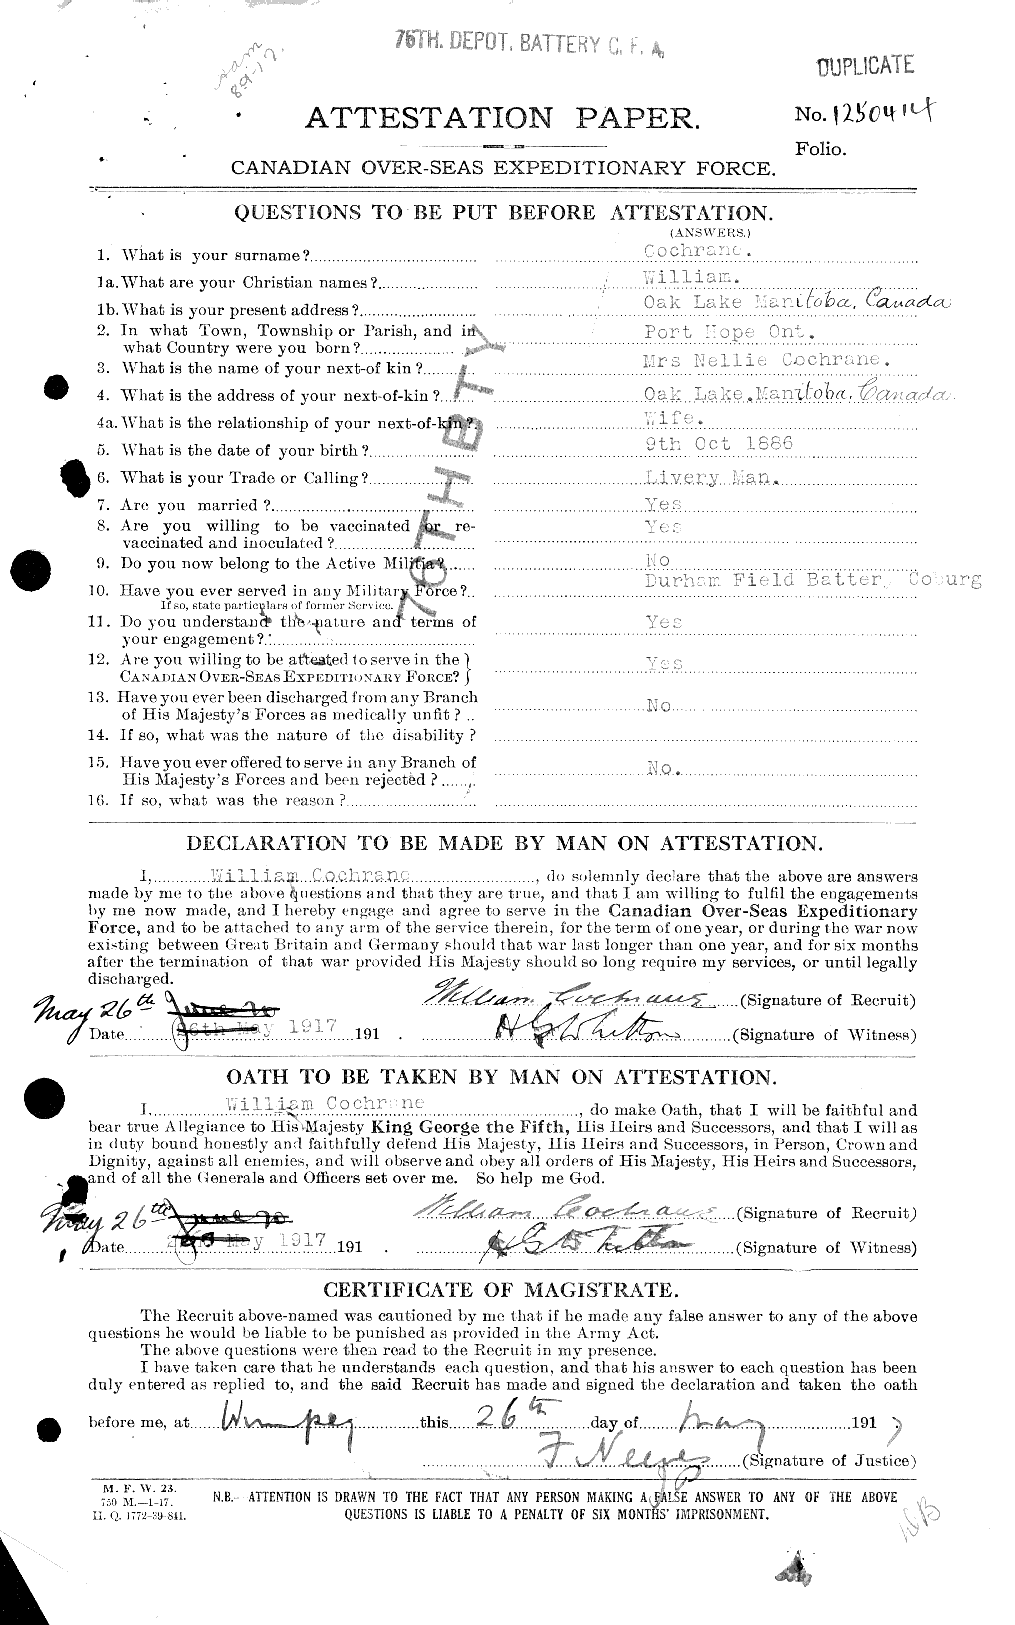 Personnel Records of the First World War - CEF 026497a